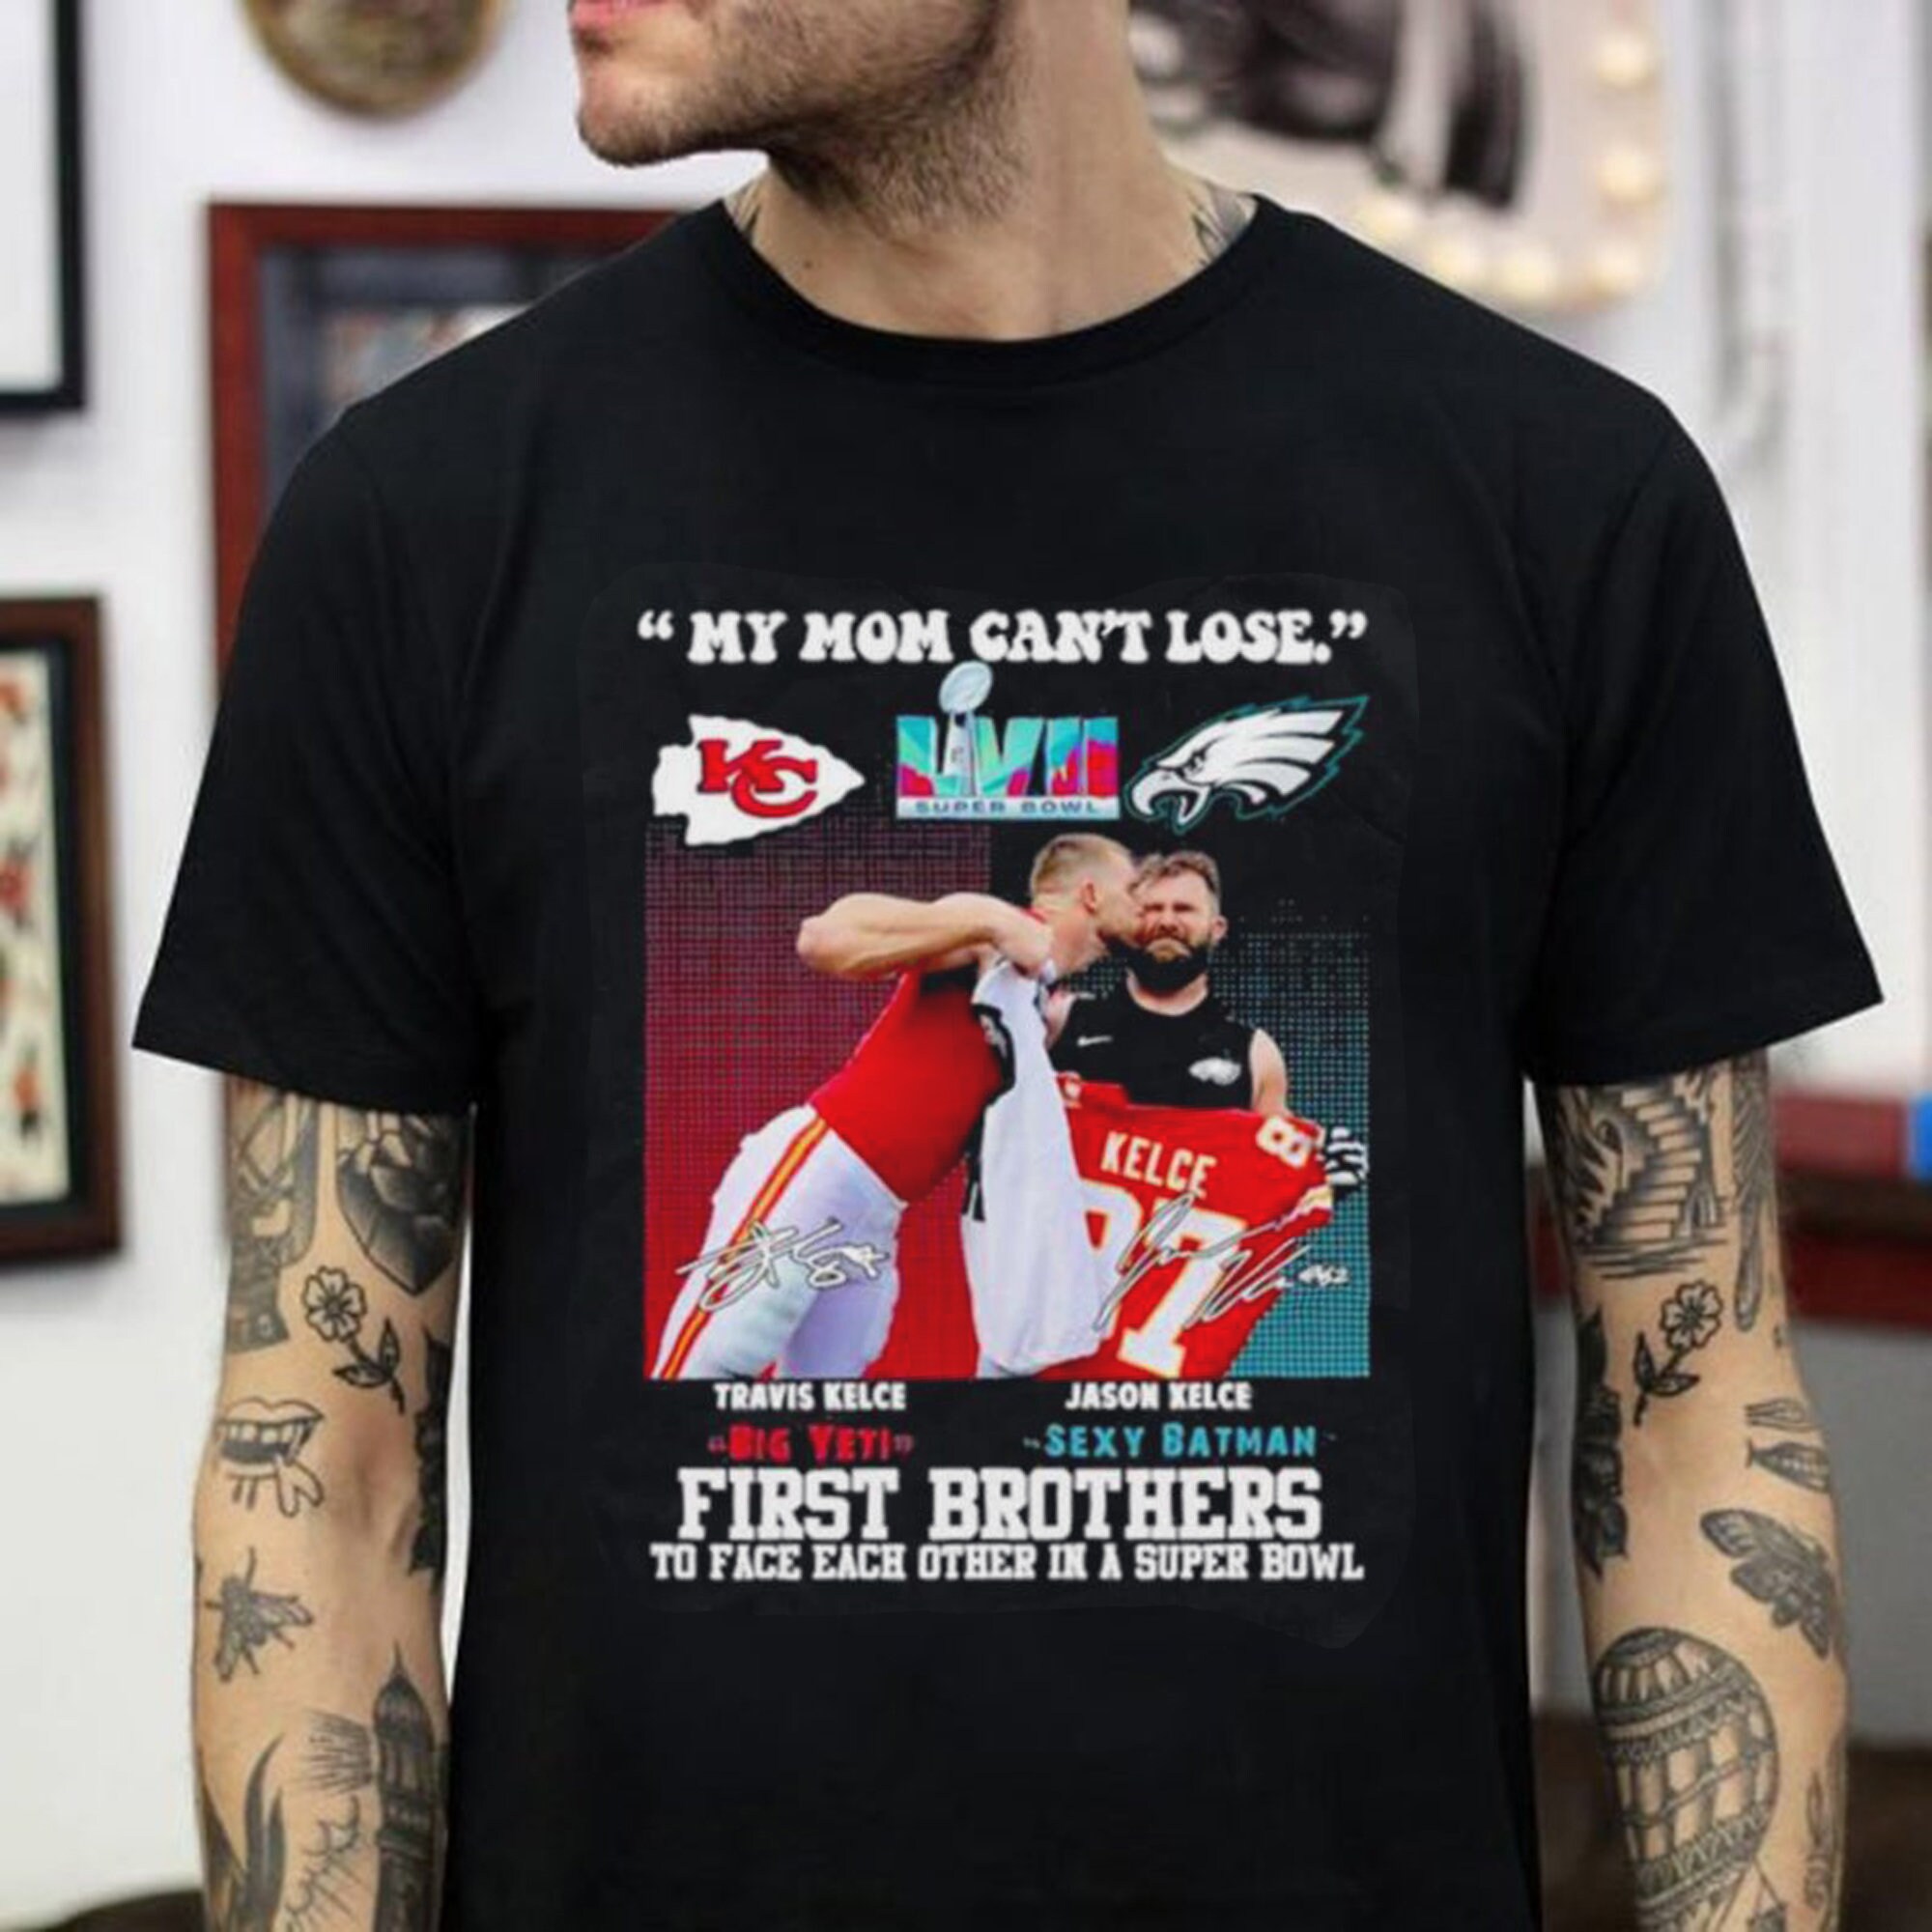 Discover Jason and Travis Kelce My Mom Cant Lose First Brothers to Face each other Shirt